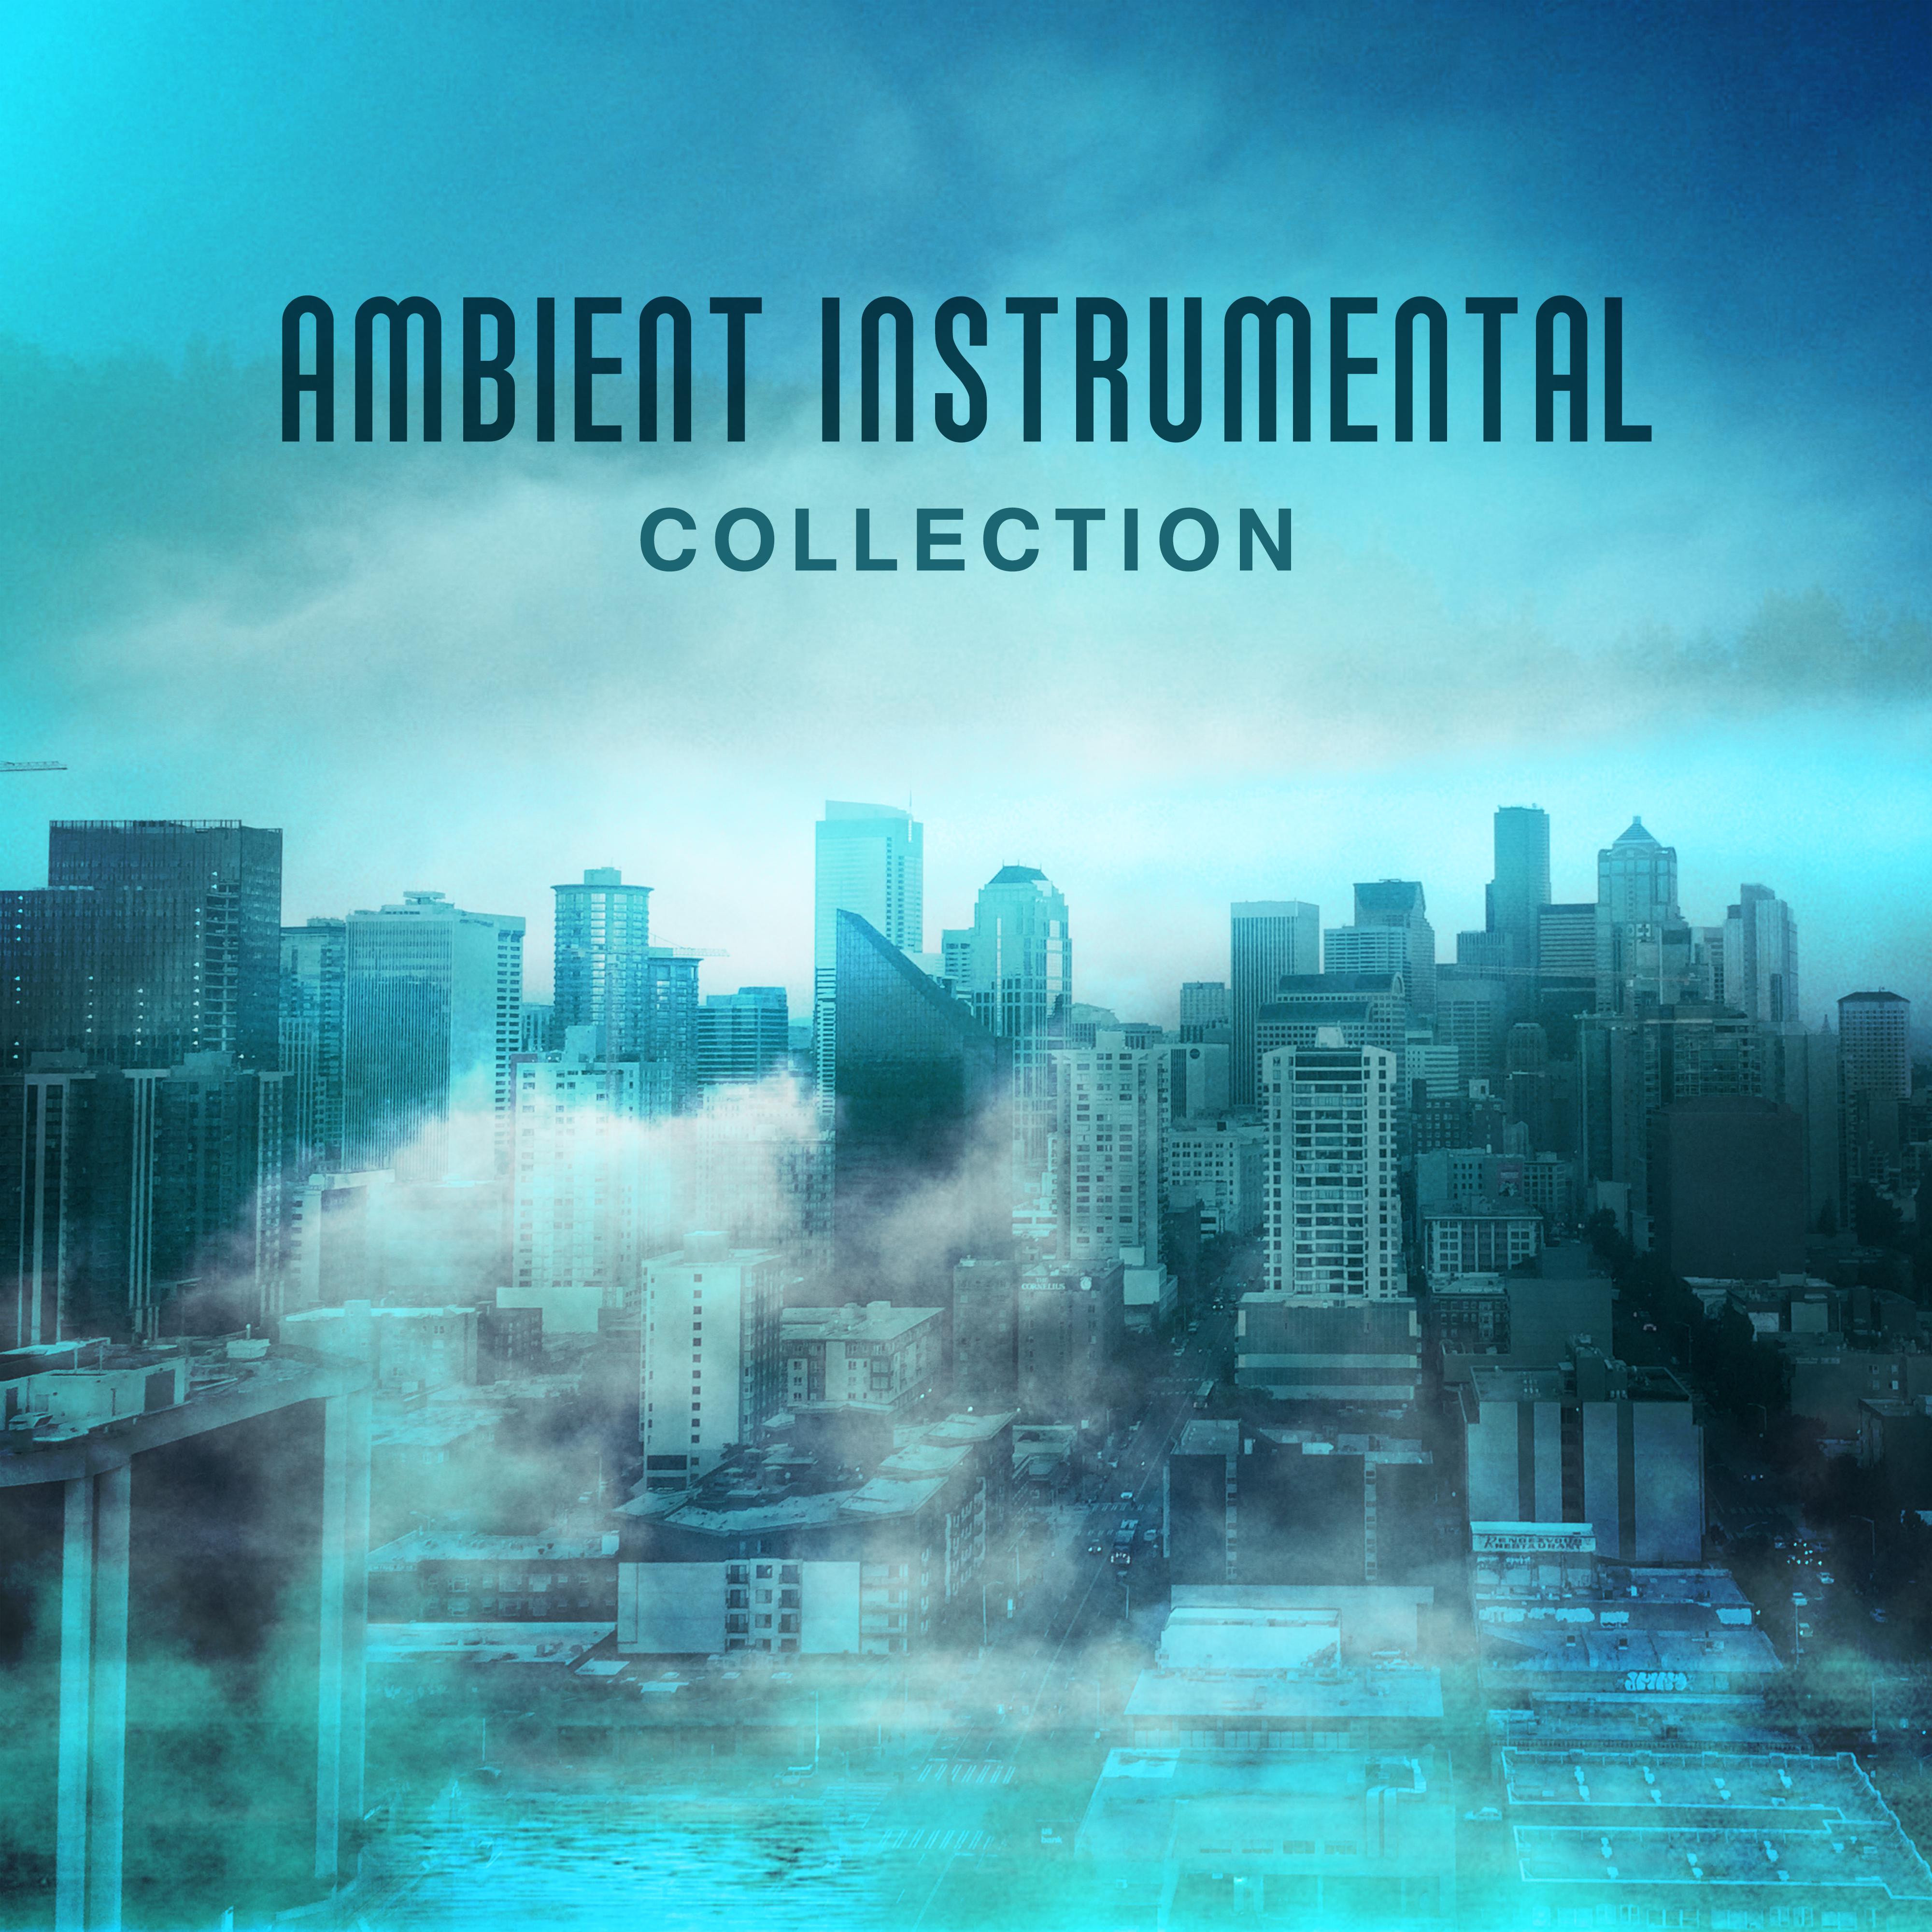 Ambient Instrumental Collection  Ultimate Jazz, Calming Piano, Relax, Smooth Jazz 2017